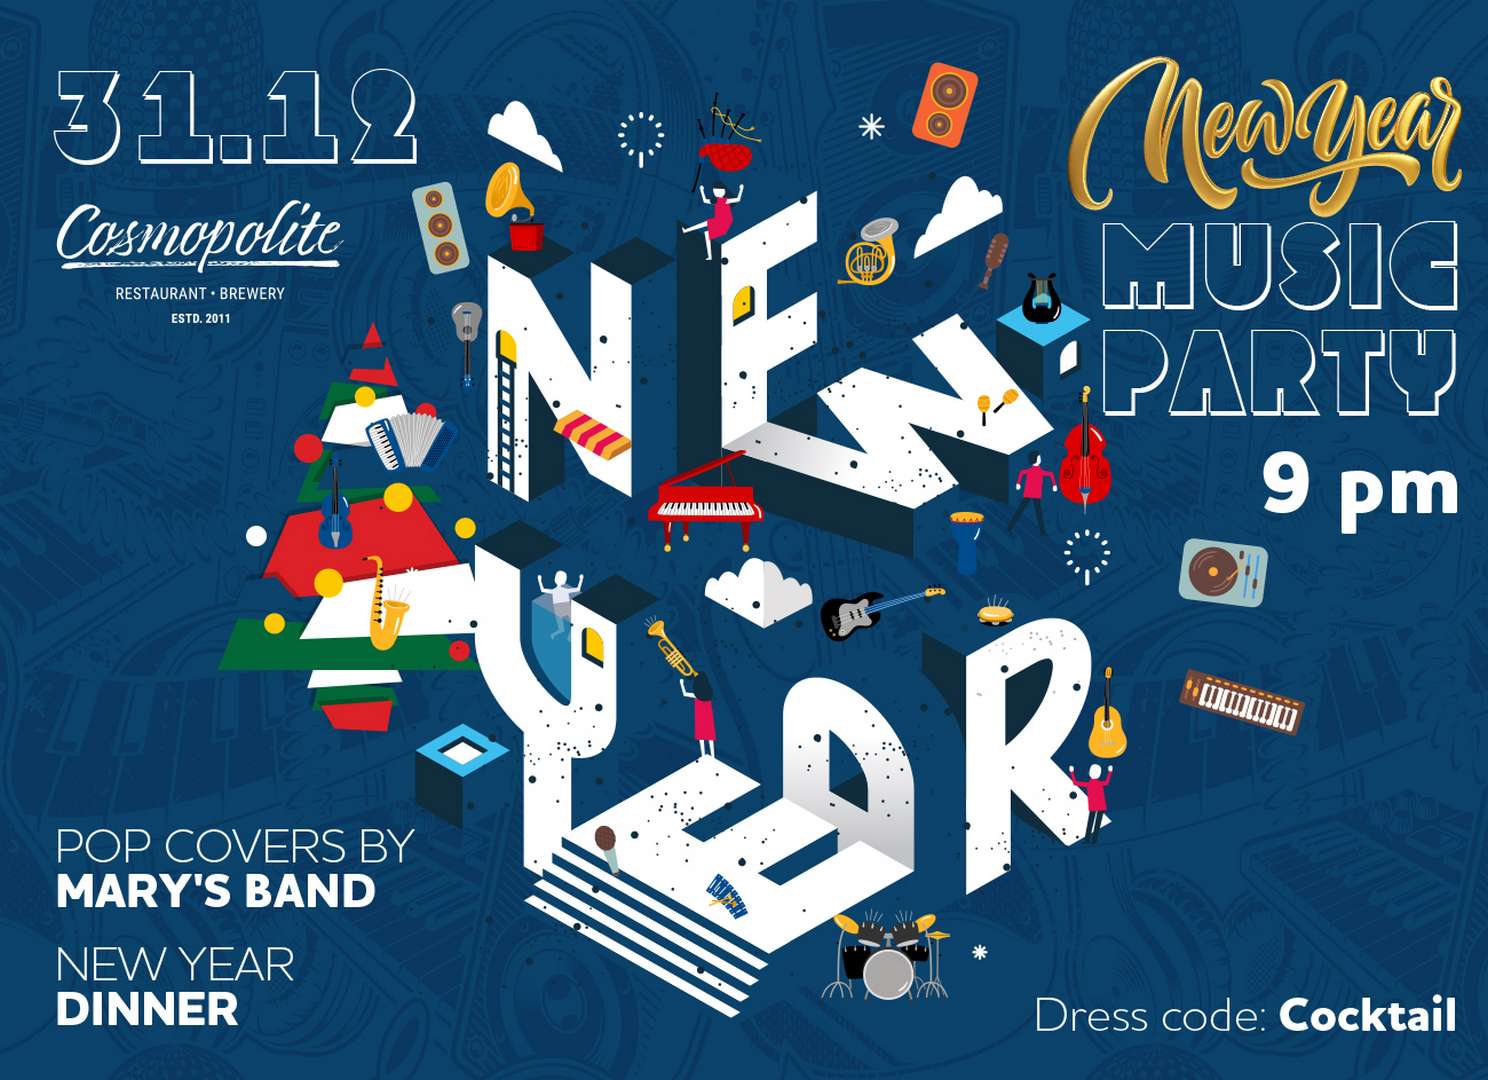 New Year Music Party 2021: Special festive offer for guests of Mercure hotel!